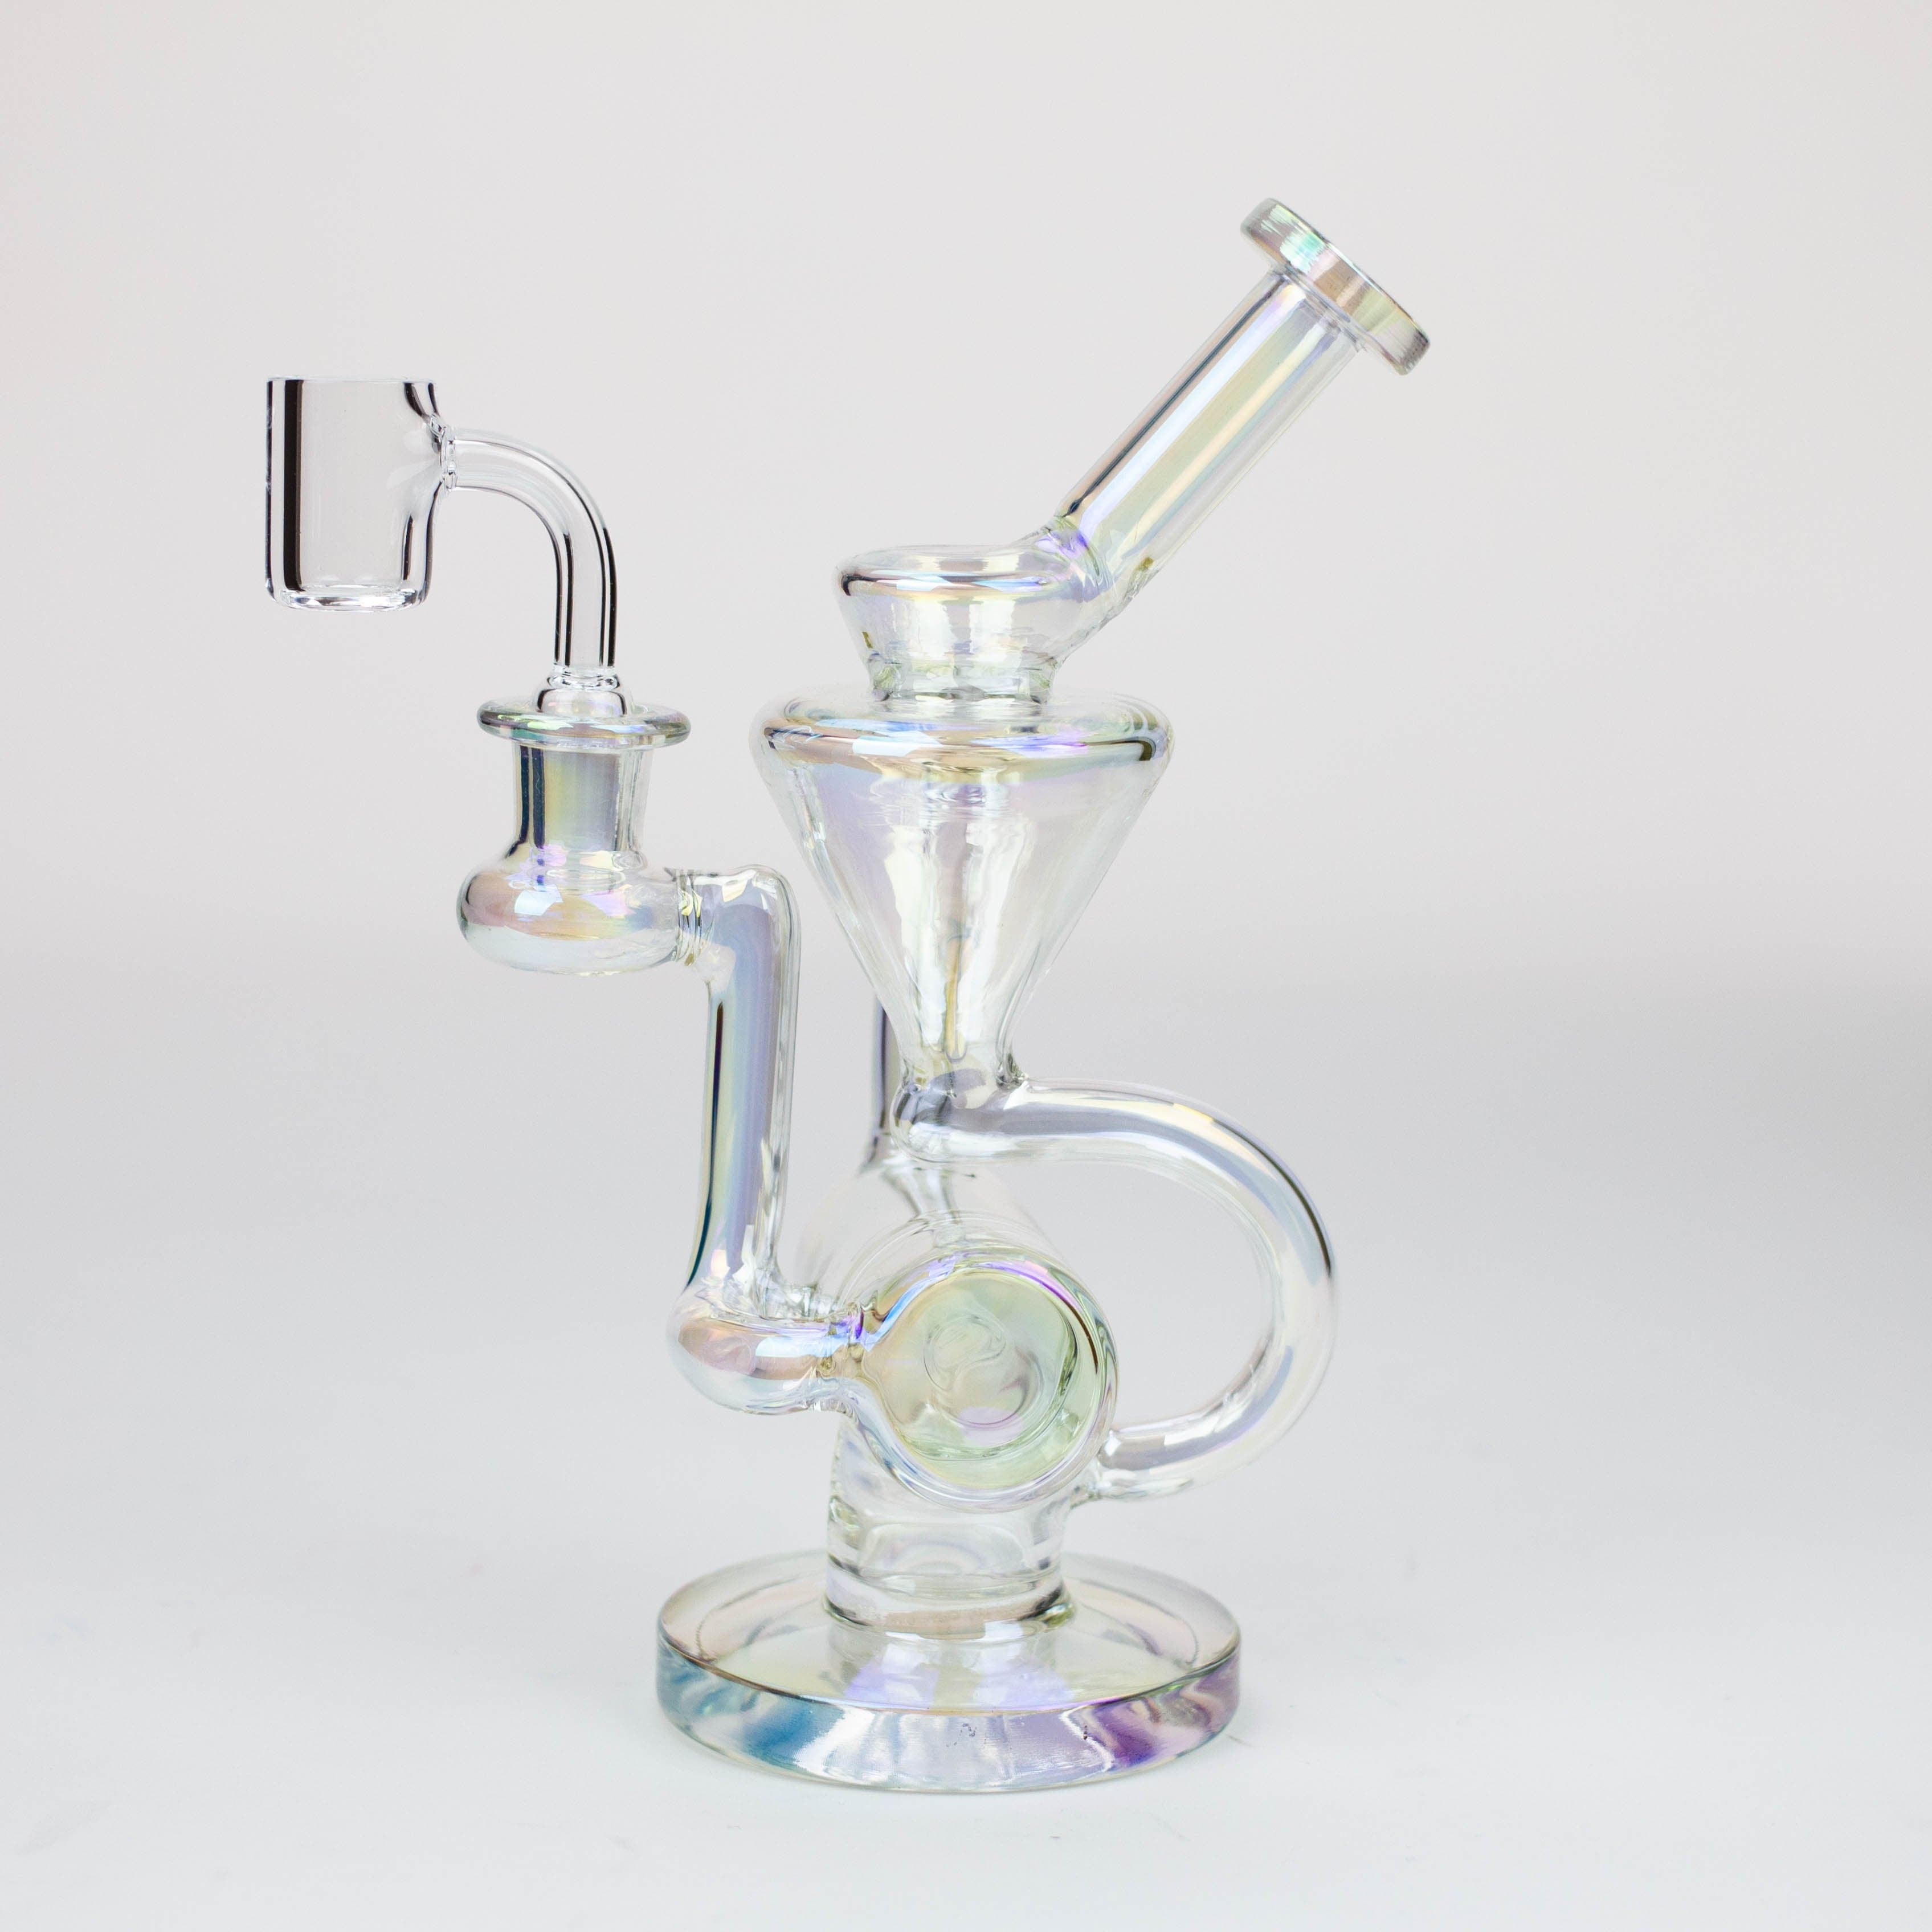 2 in 1 electroplated glass recycler rig 8"_1